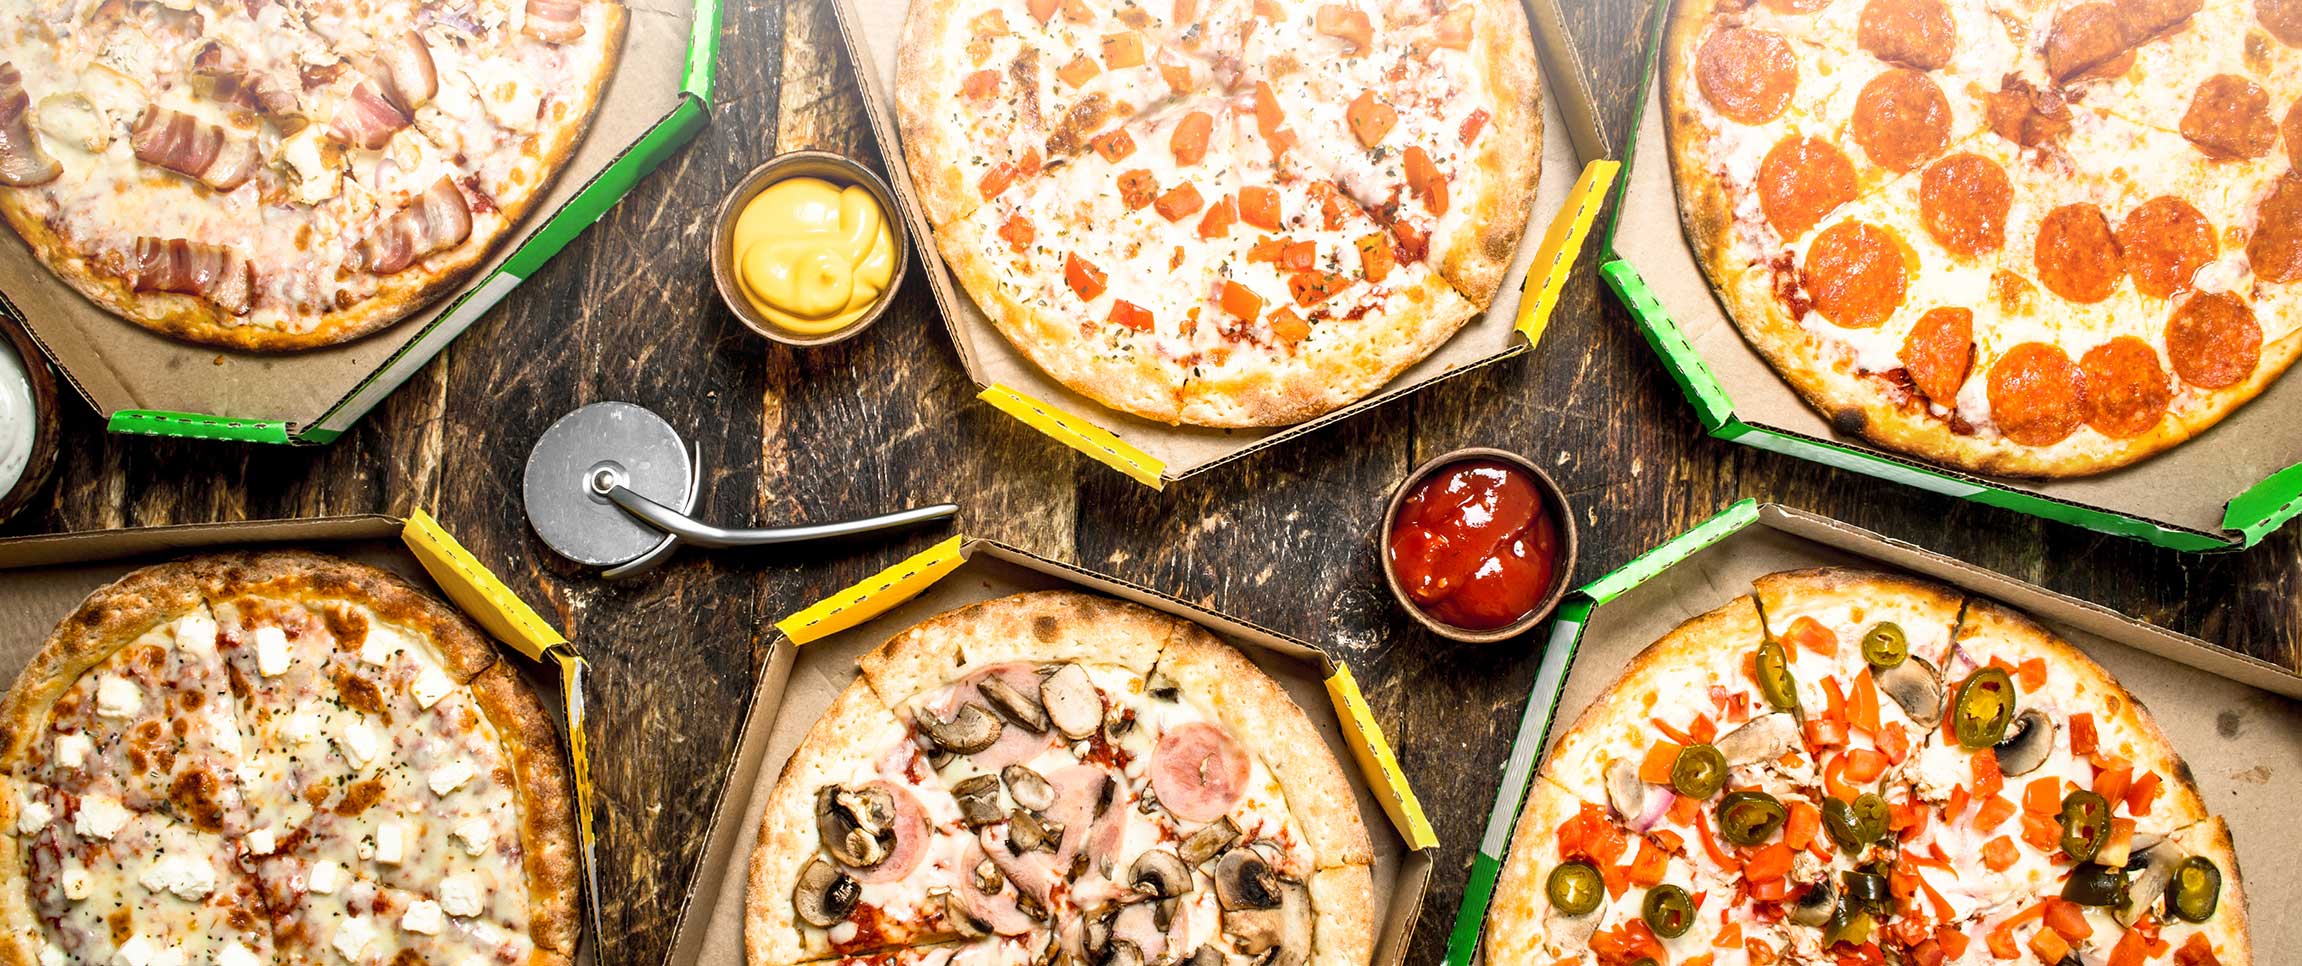 Awesome Sauce - Variety of Pizzas